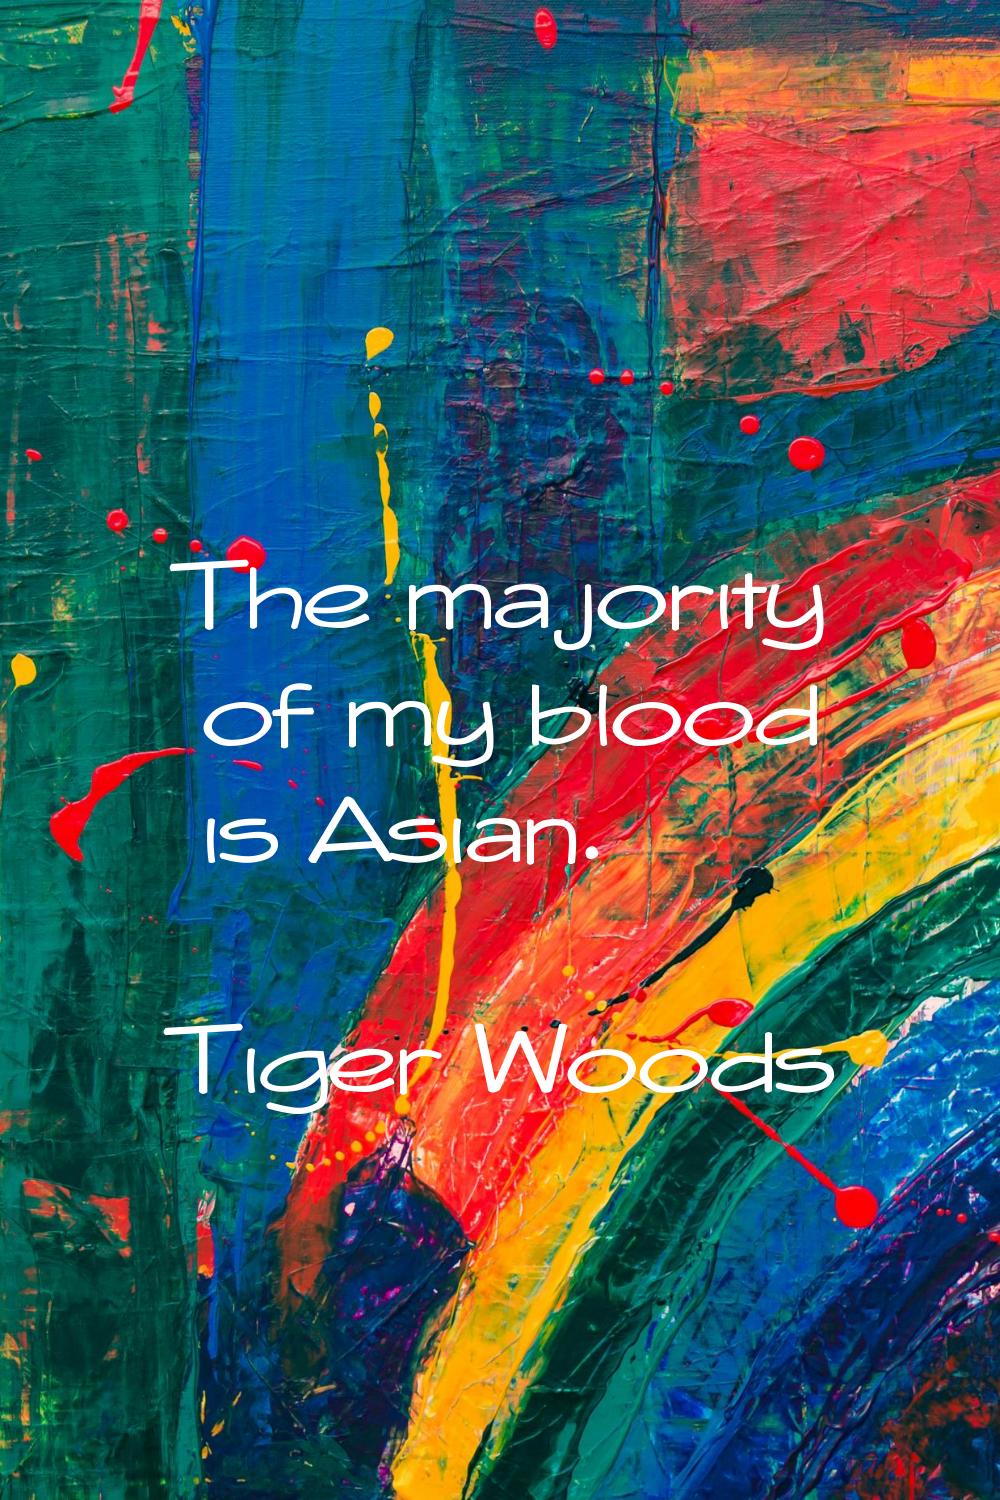 The majority of my blood is Asian.